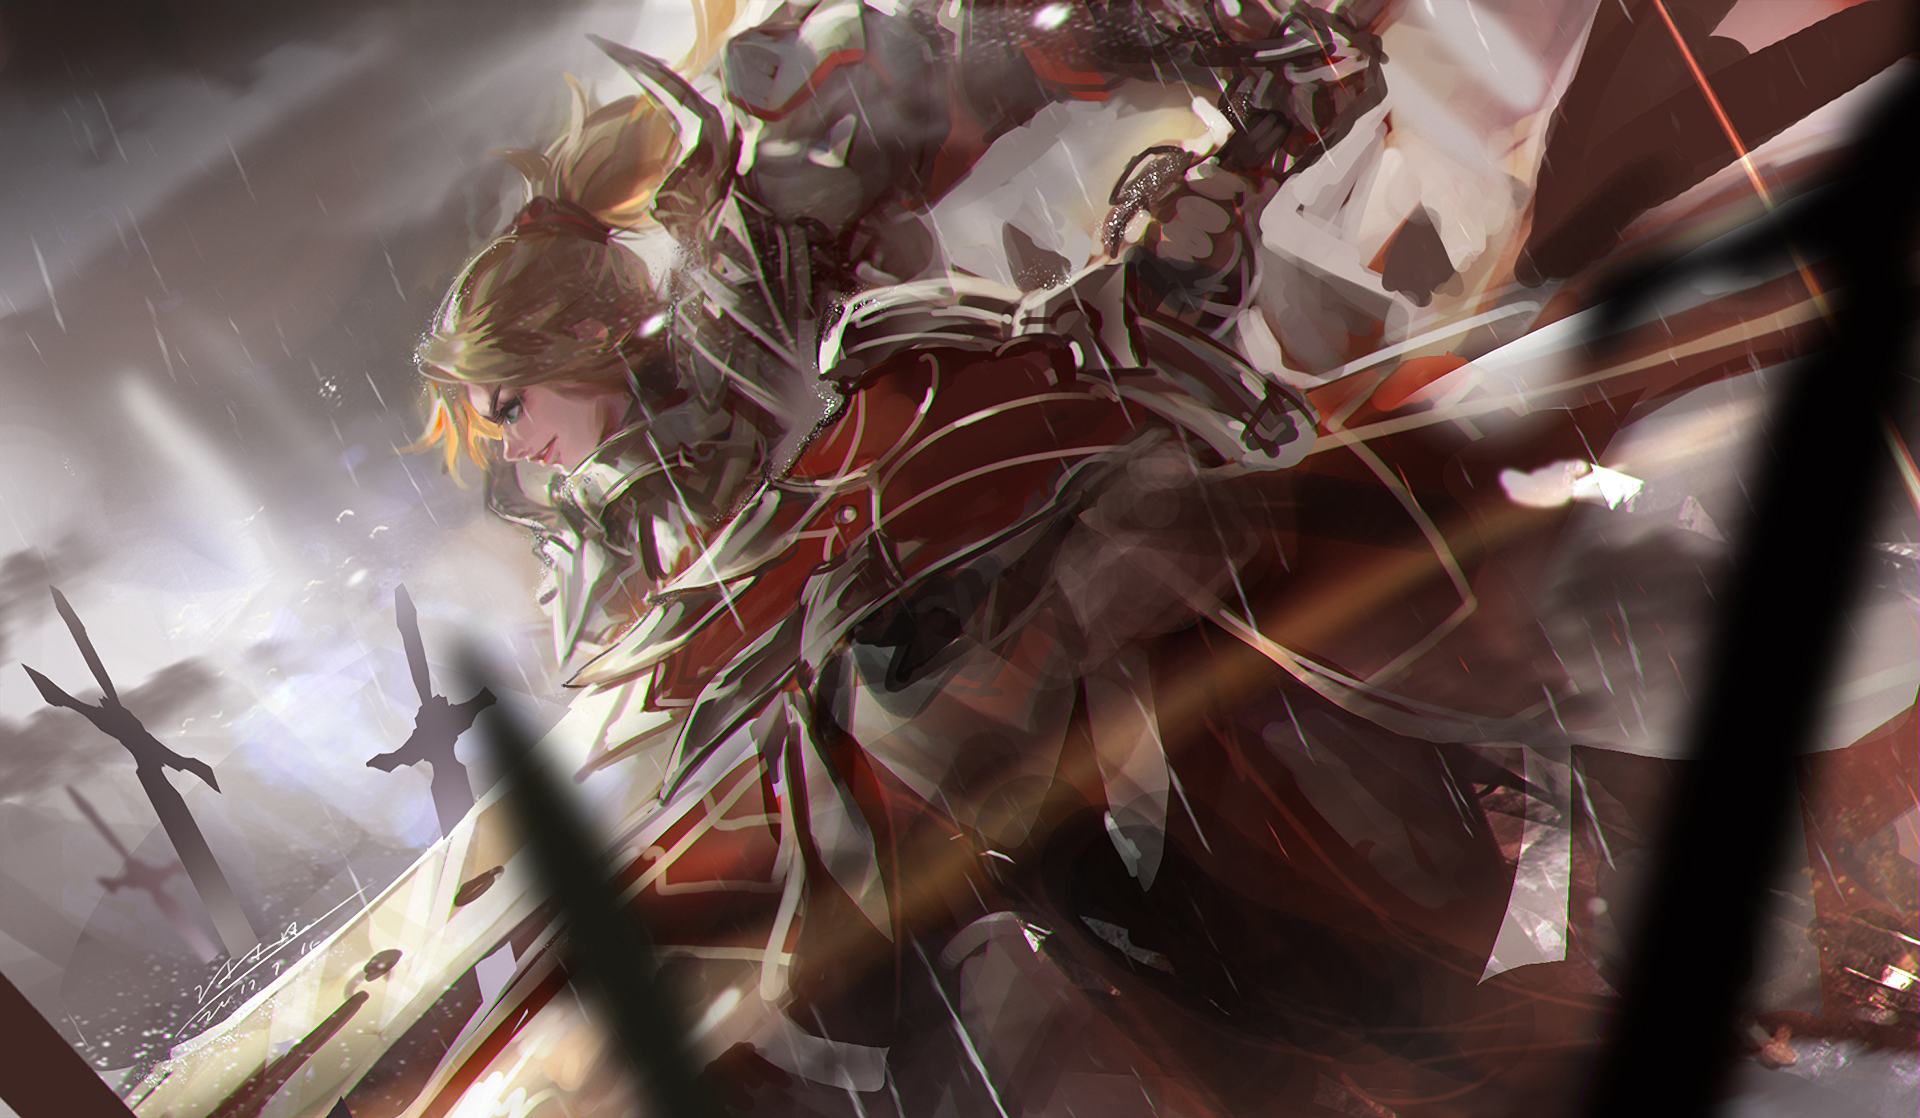 Armor Blonde Girl Mordred Fate Apocrypha Ponytail Rain Saber Of Red Fate Apocrypha Sword Woman Warri 1920x1118